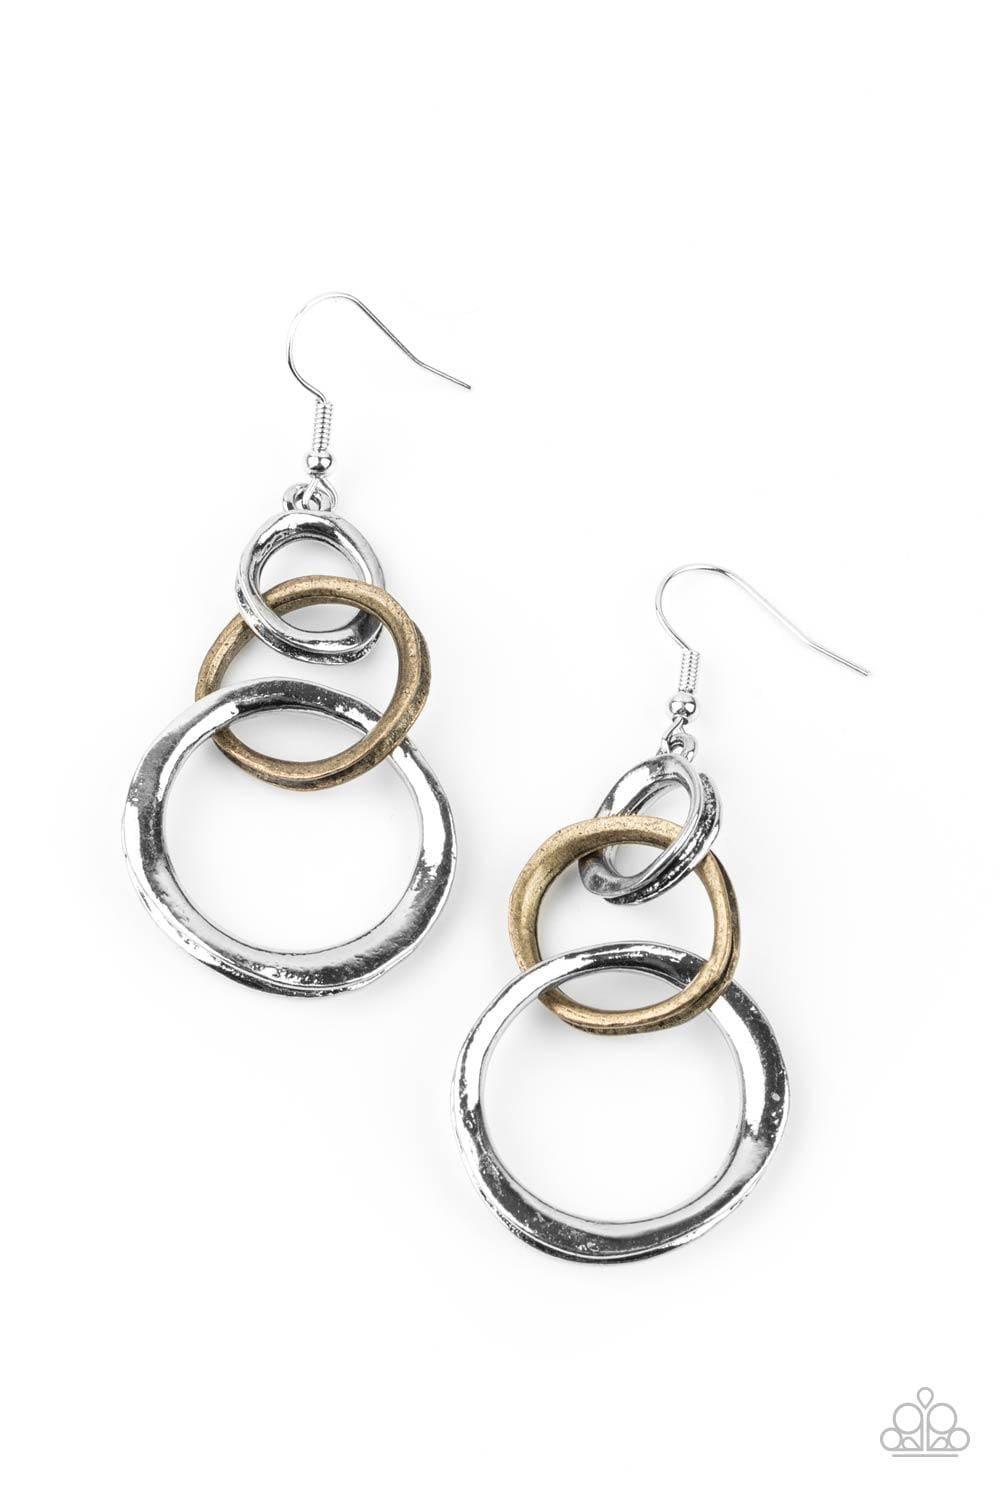 Paparazzi Accessories - Harmoniously Handcrafted - Silver Earrings - Bling by JessieK